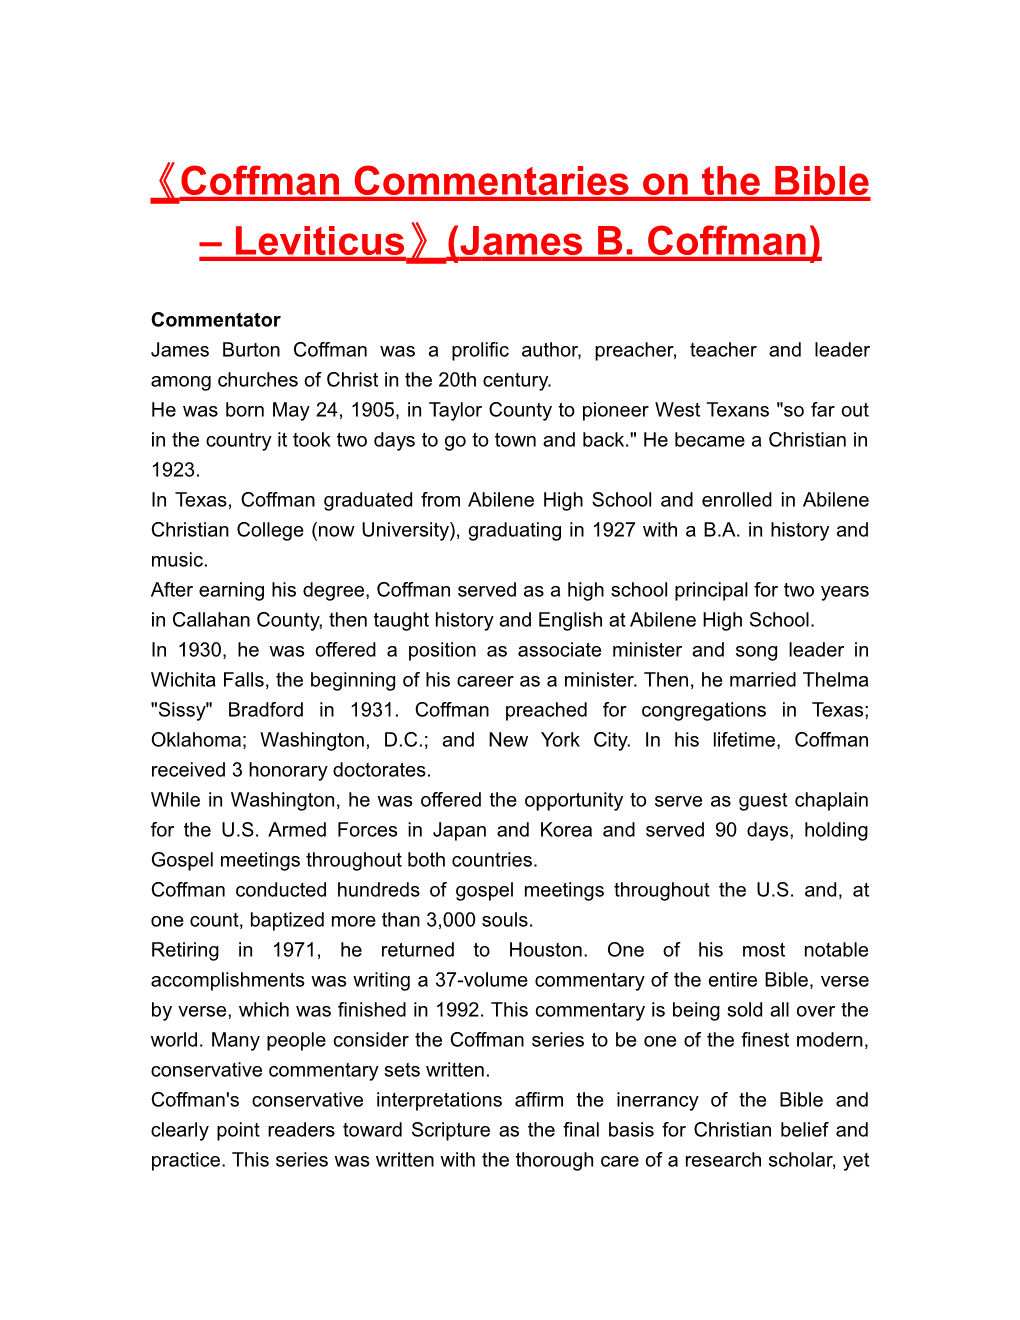 Coffman Commentaries on the Bible Leviticus (James B. Coffman)